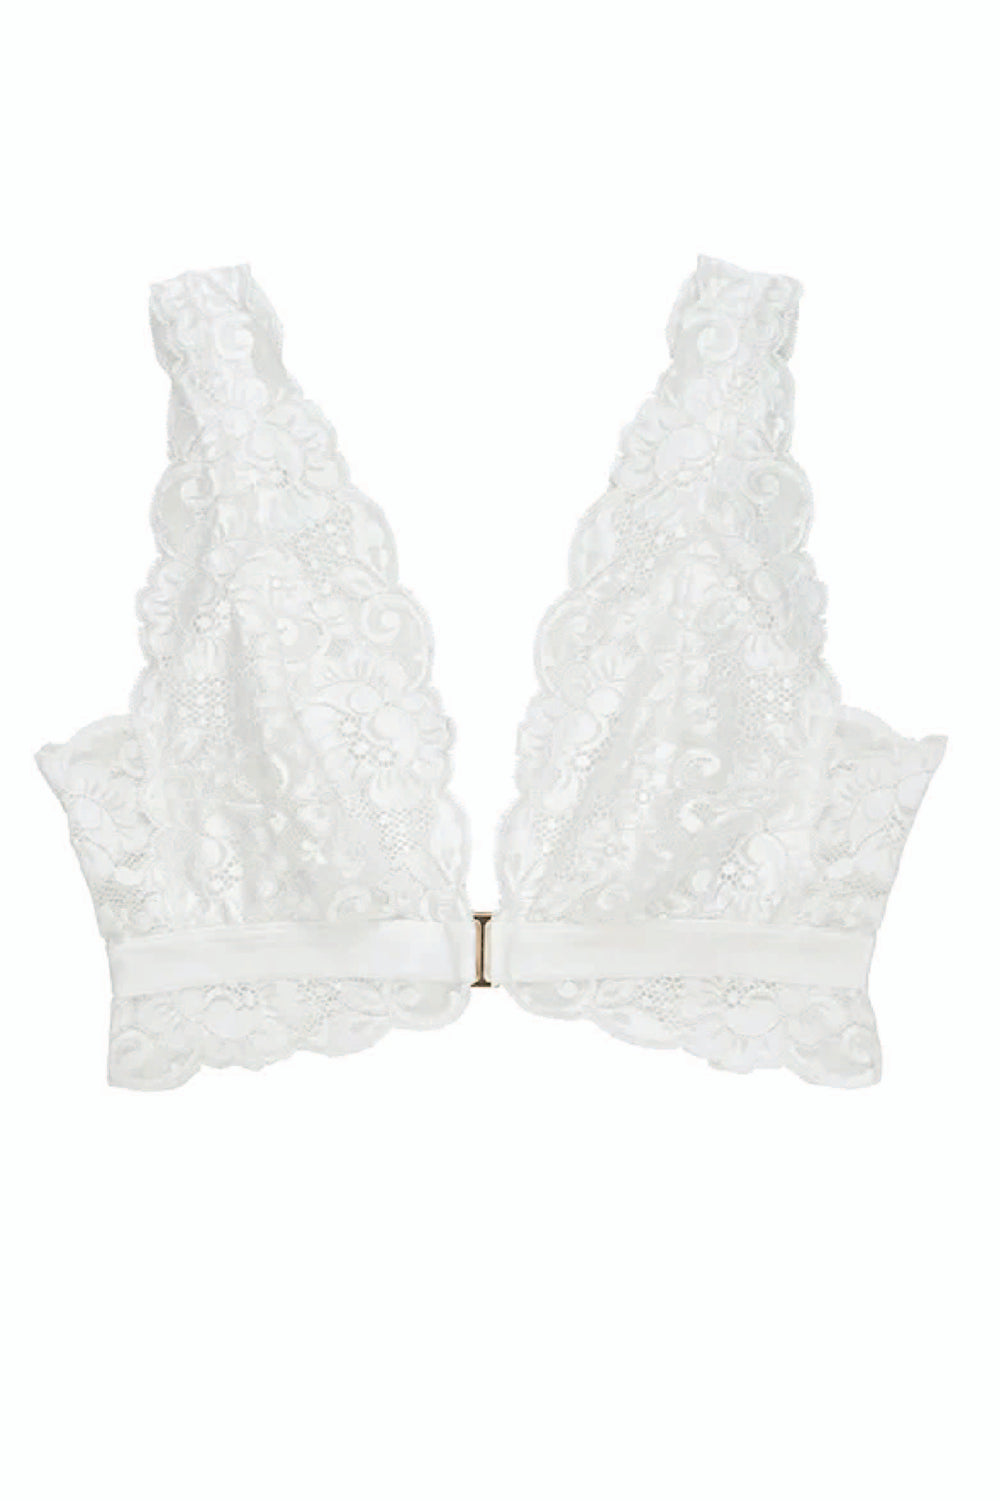 Buy White Recycled Lace Full Cup Comfort Bra 38B, Bras